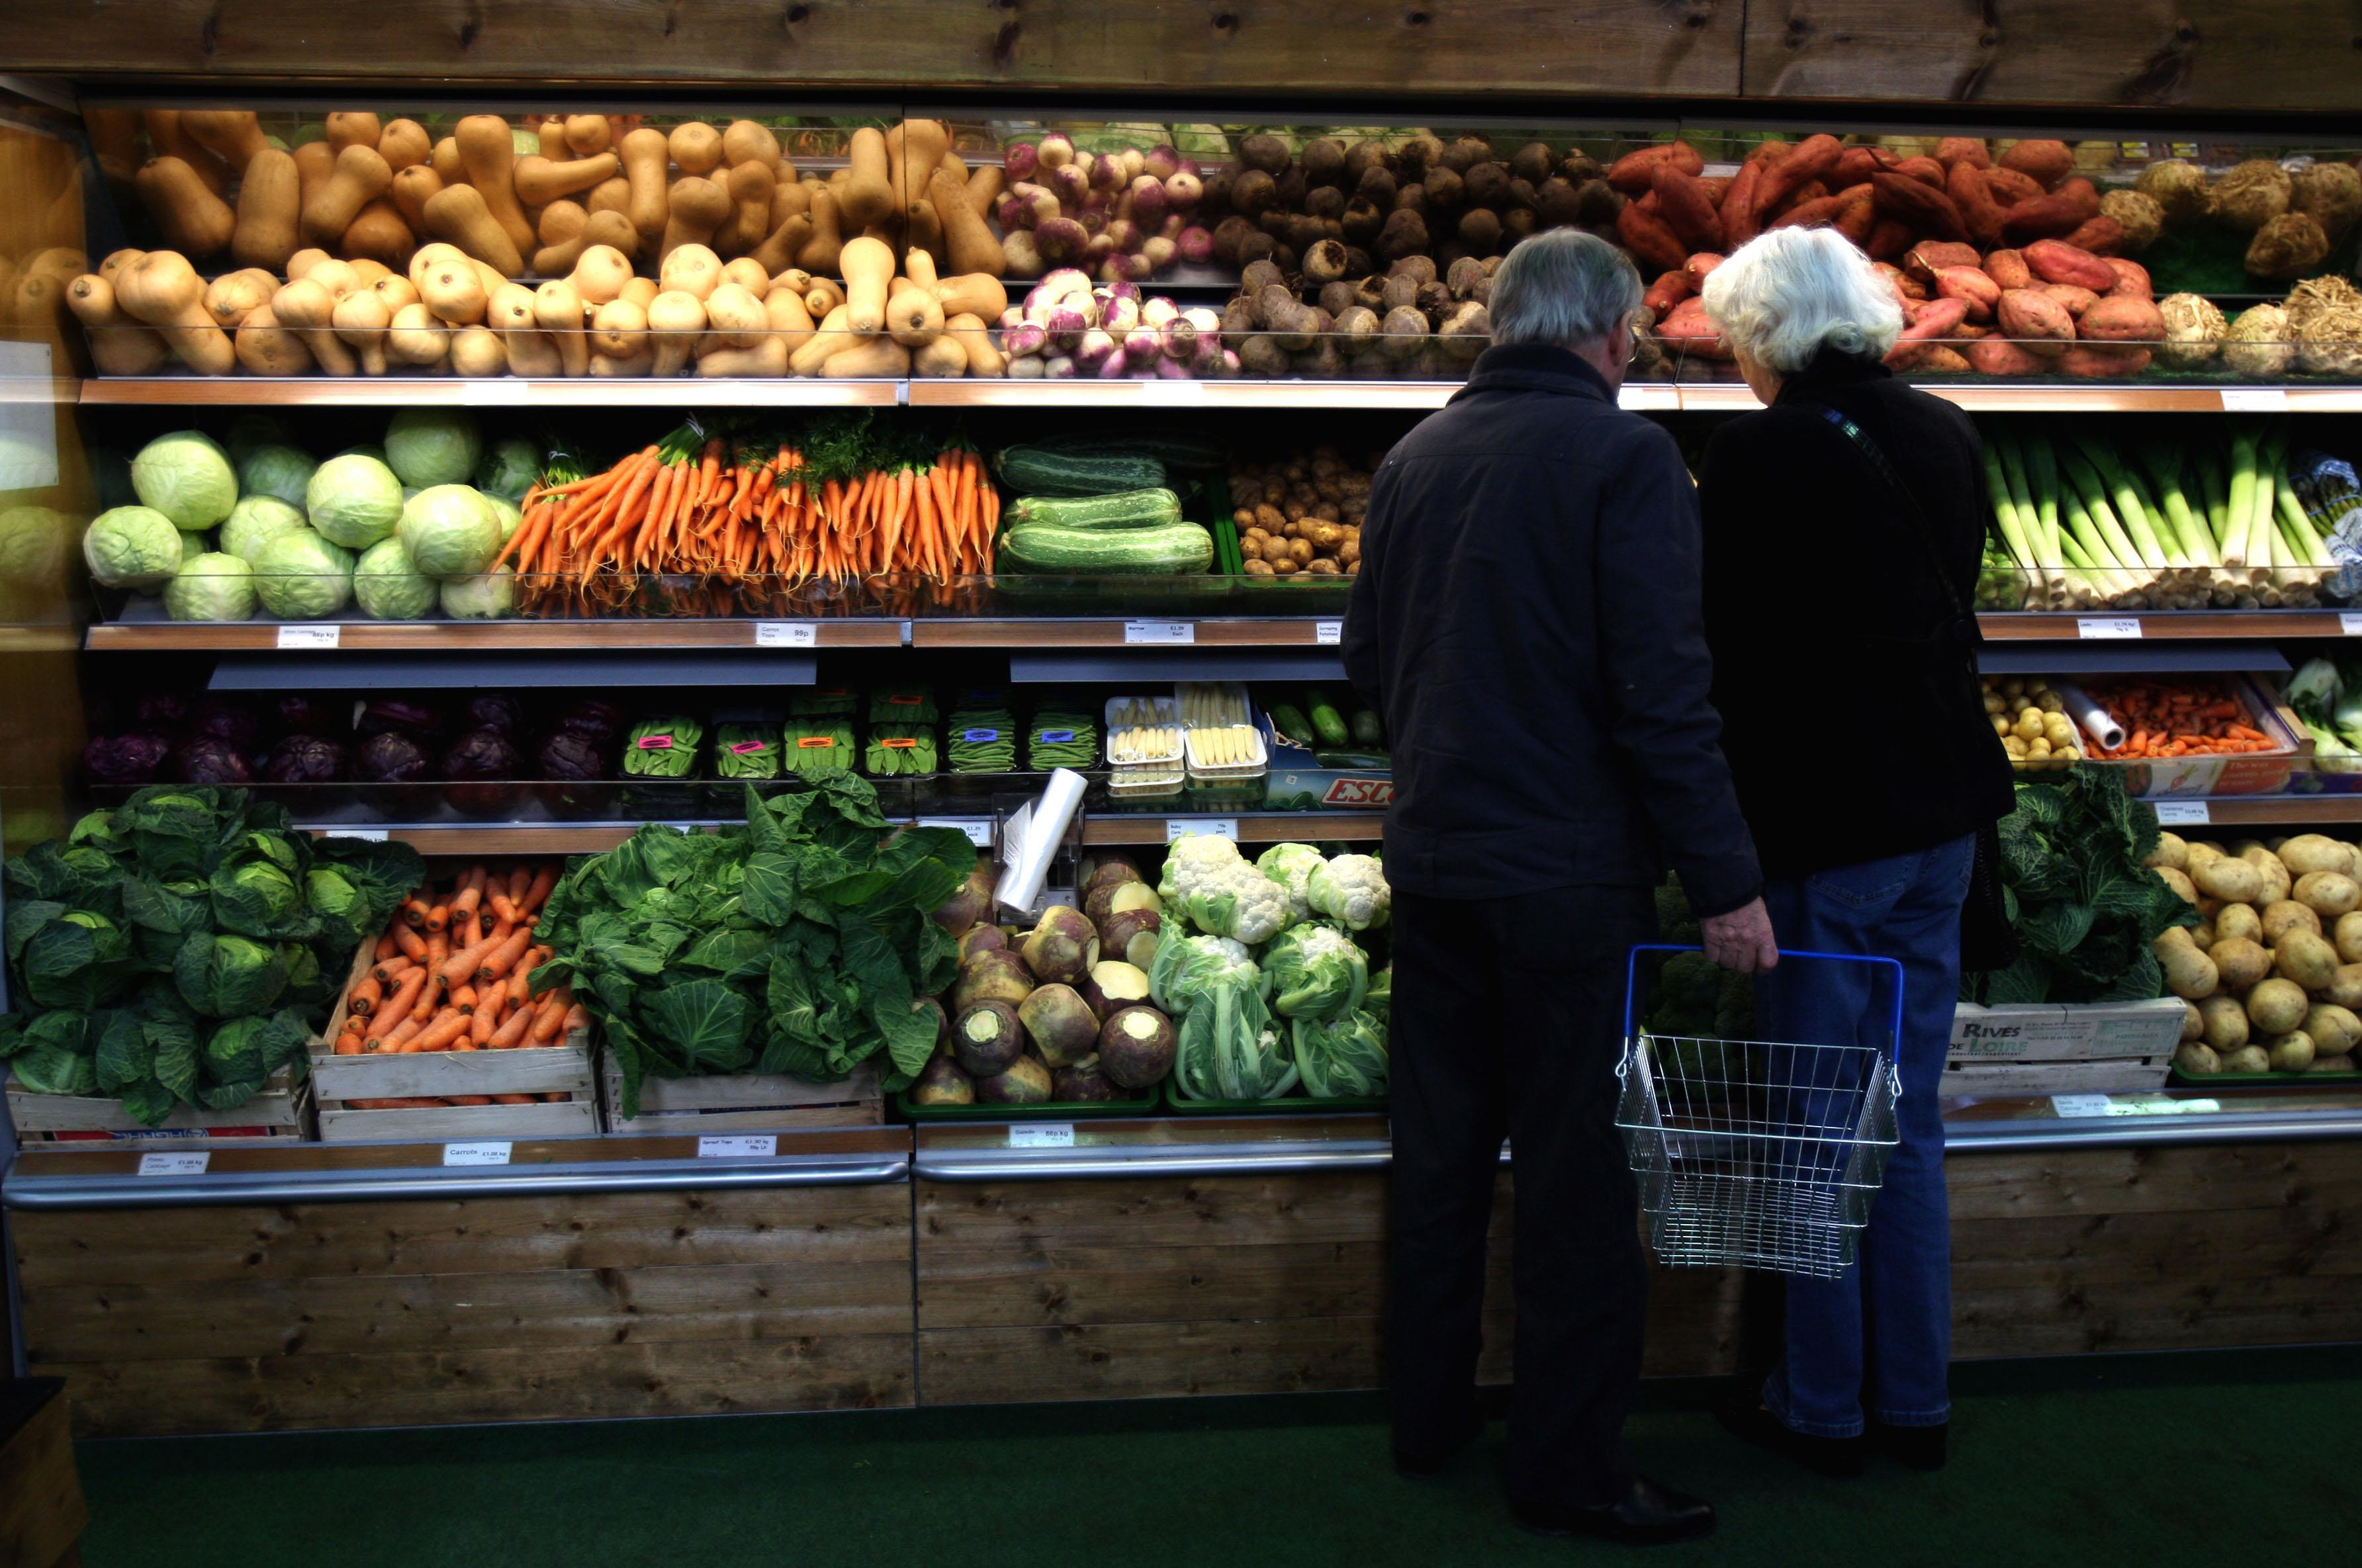 A couple standing looking at rows of vegetables in a supermarket